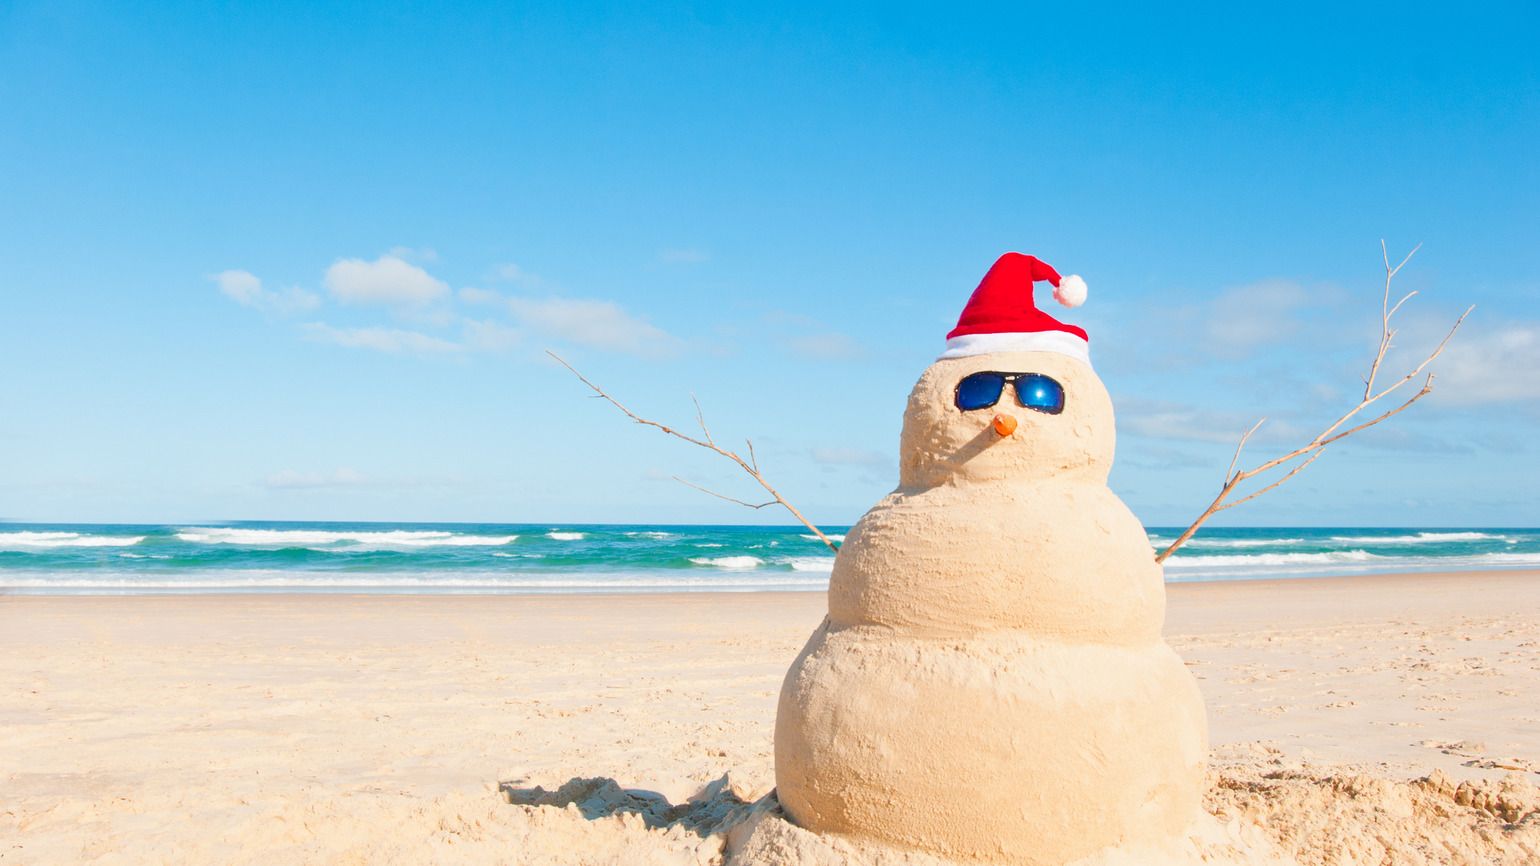 Snowman at the beach with sun glasses (Getty Images)